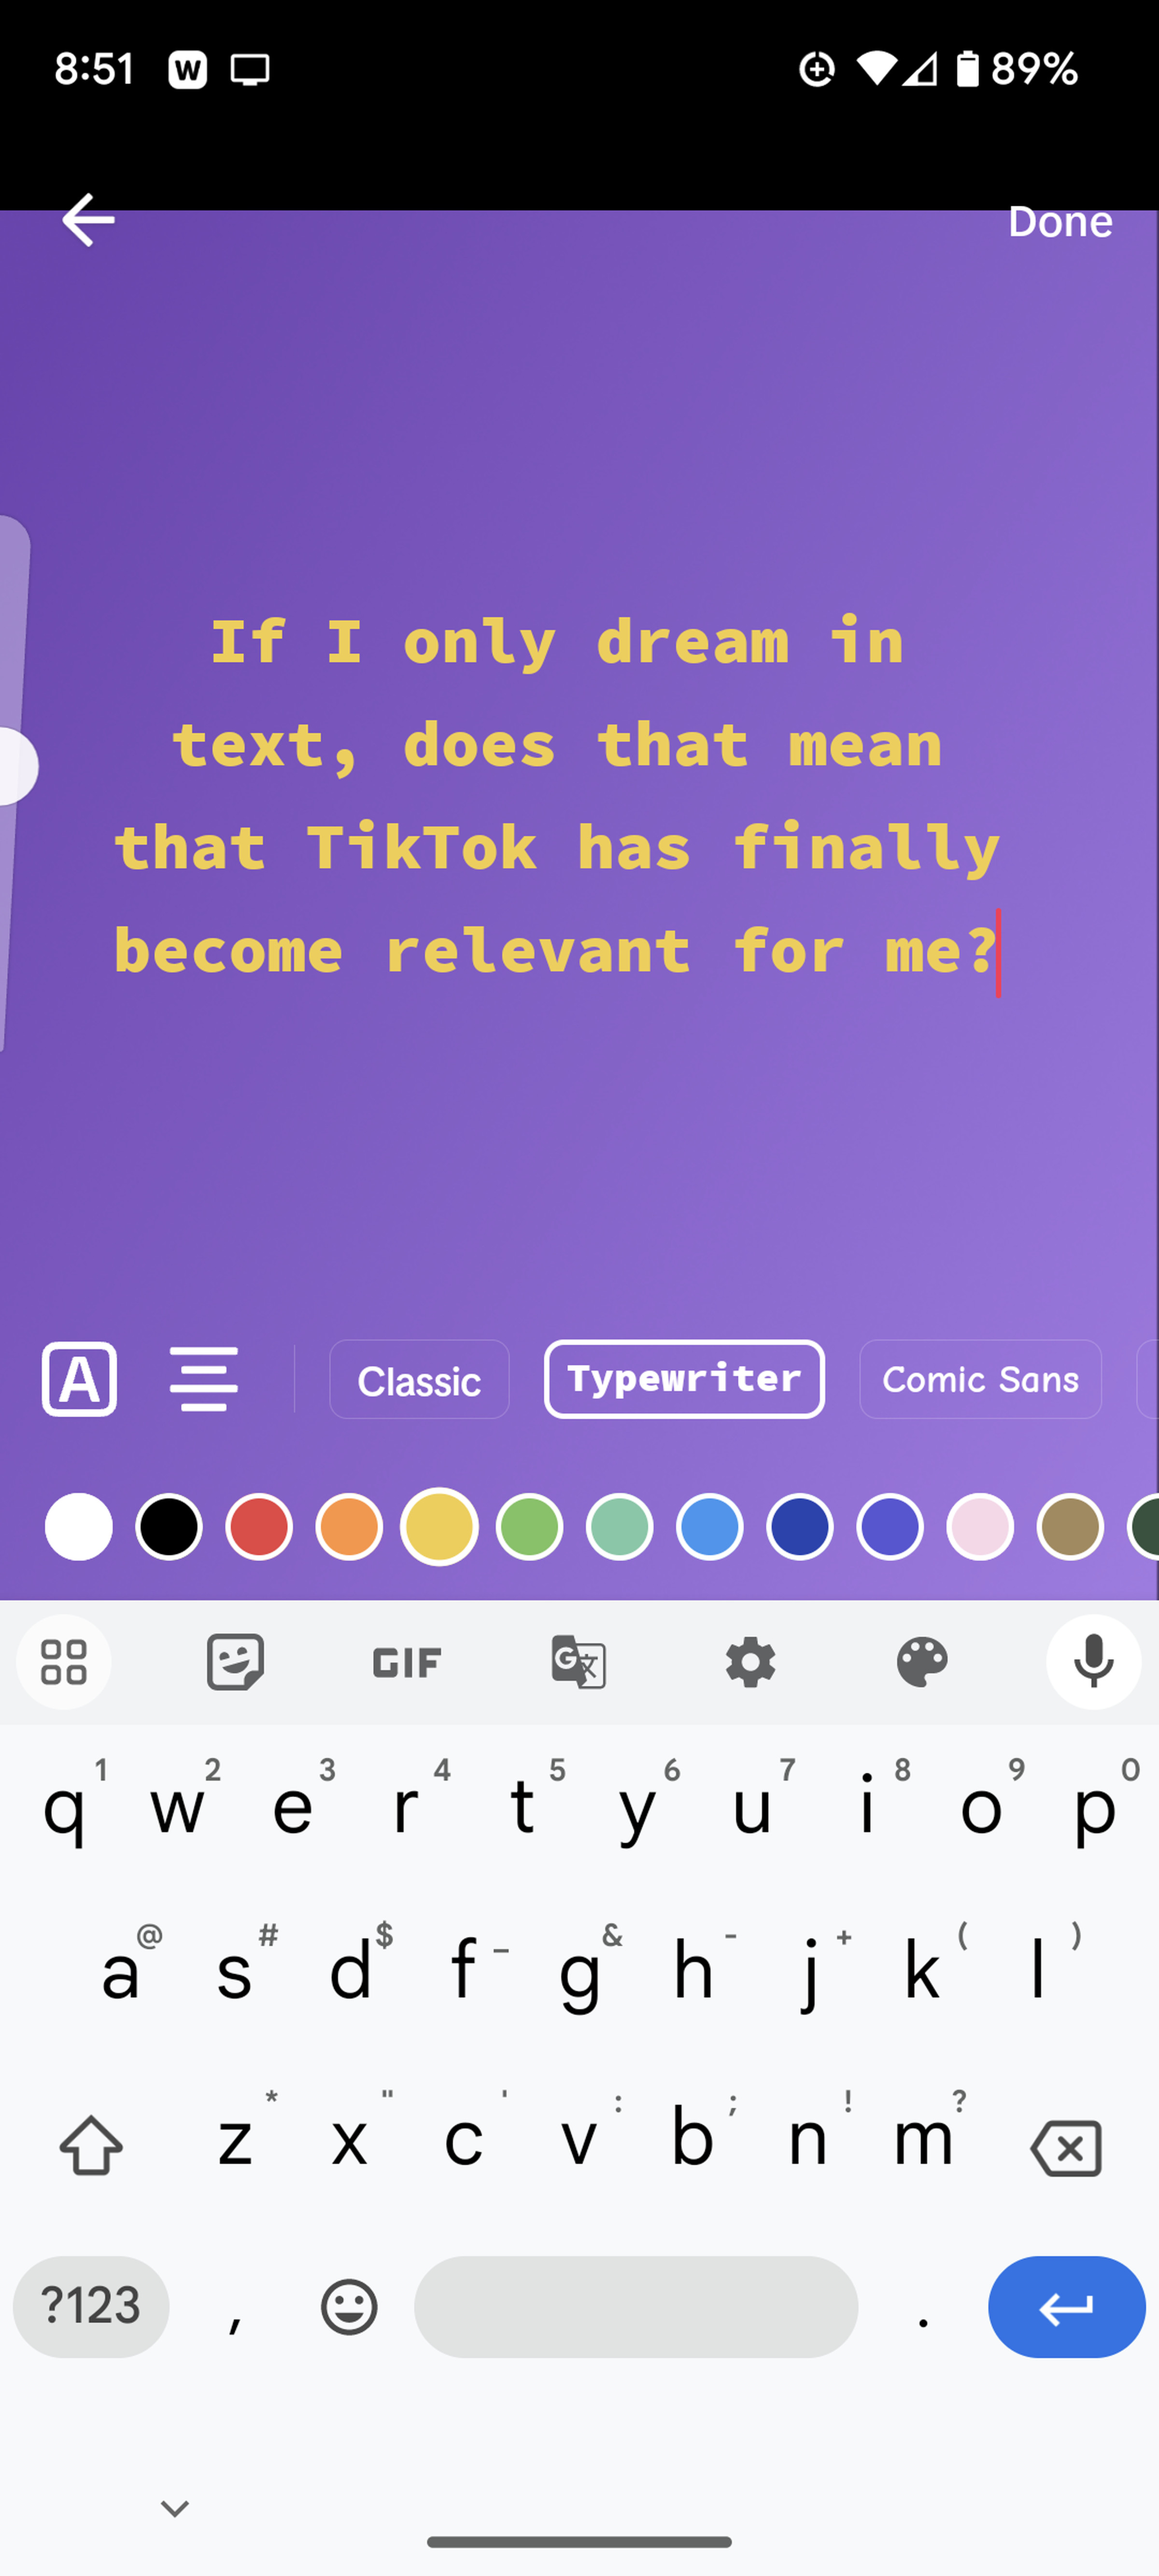 Yellow text on purple background reading “If I only dream in text, does that mean that TikTok has finally. become relevant for me?” with colored circles beneath.